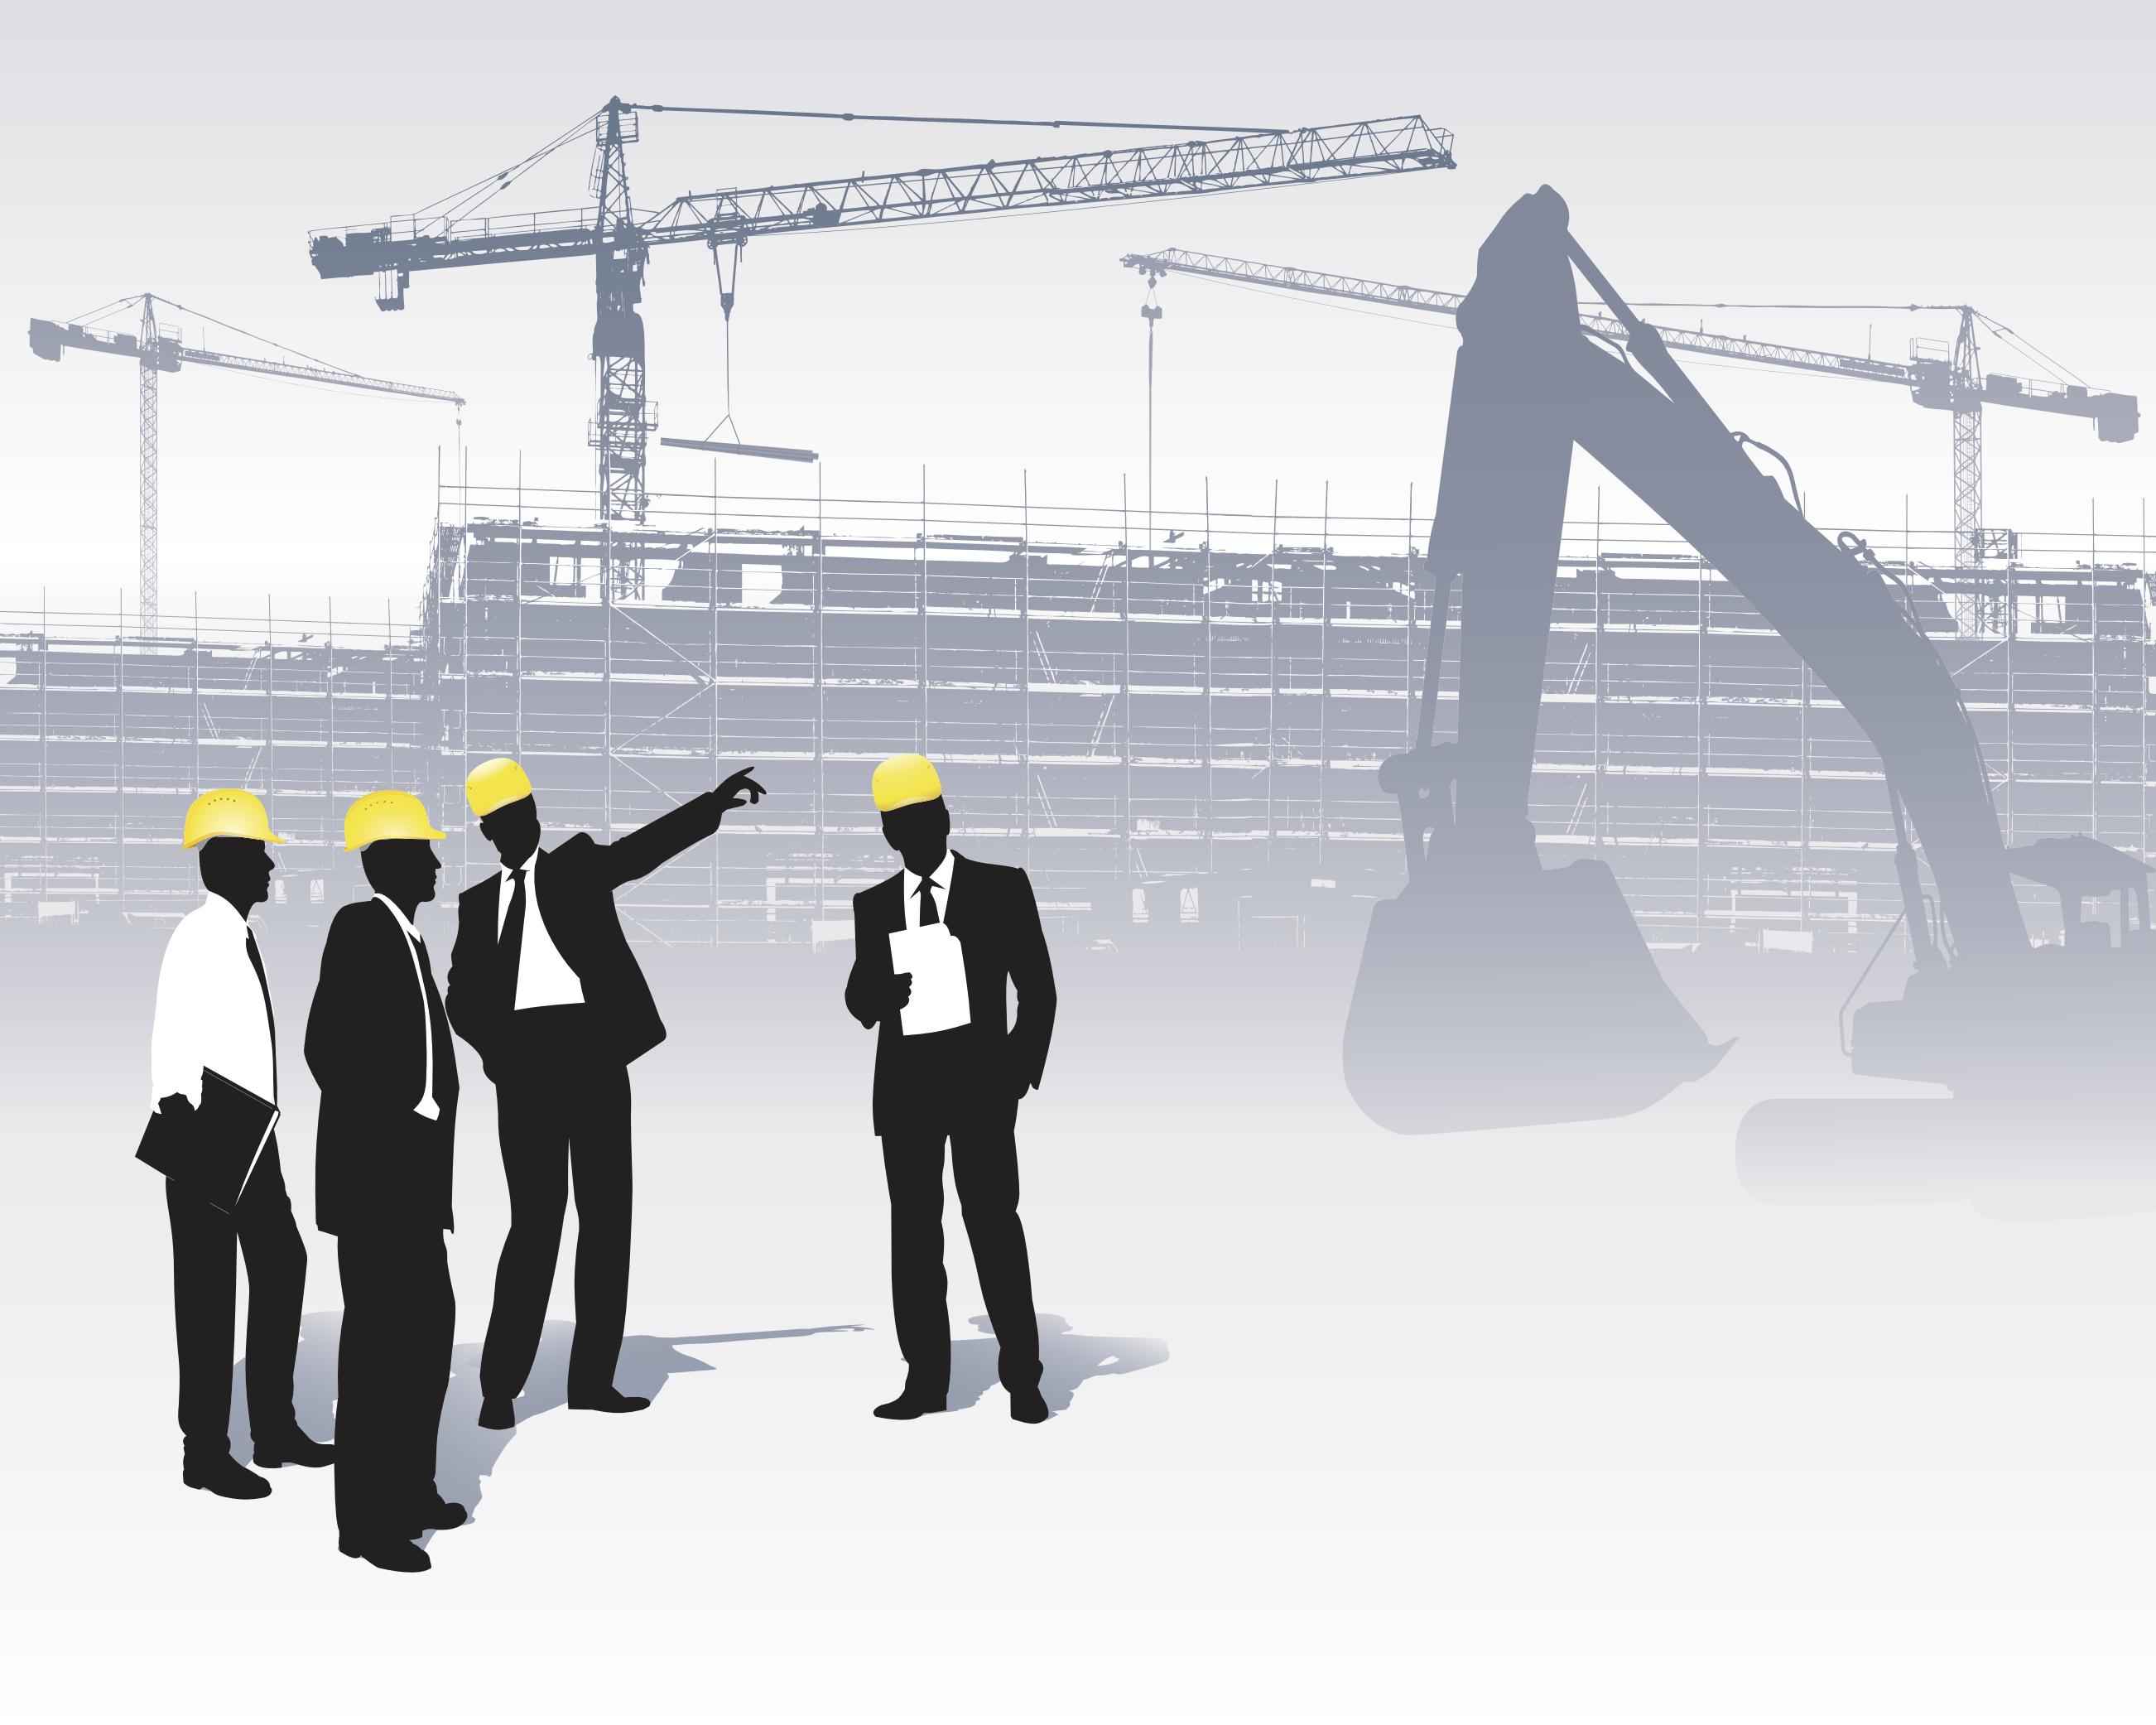 Business People Silhouette - Construction [EPS File]